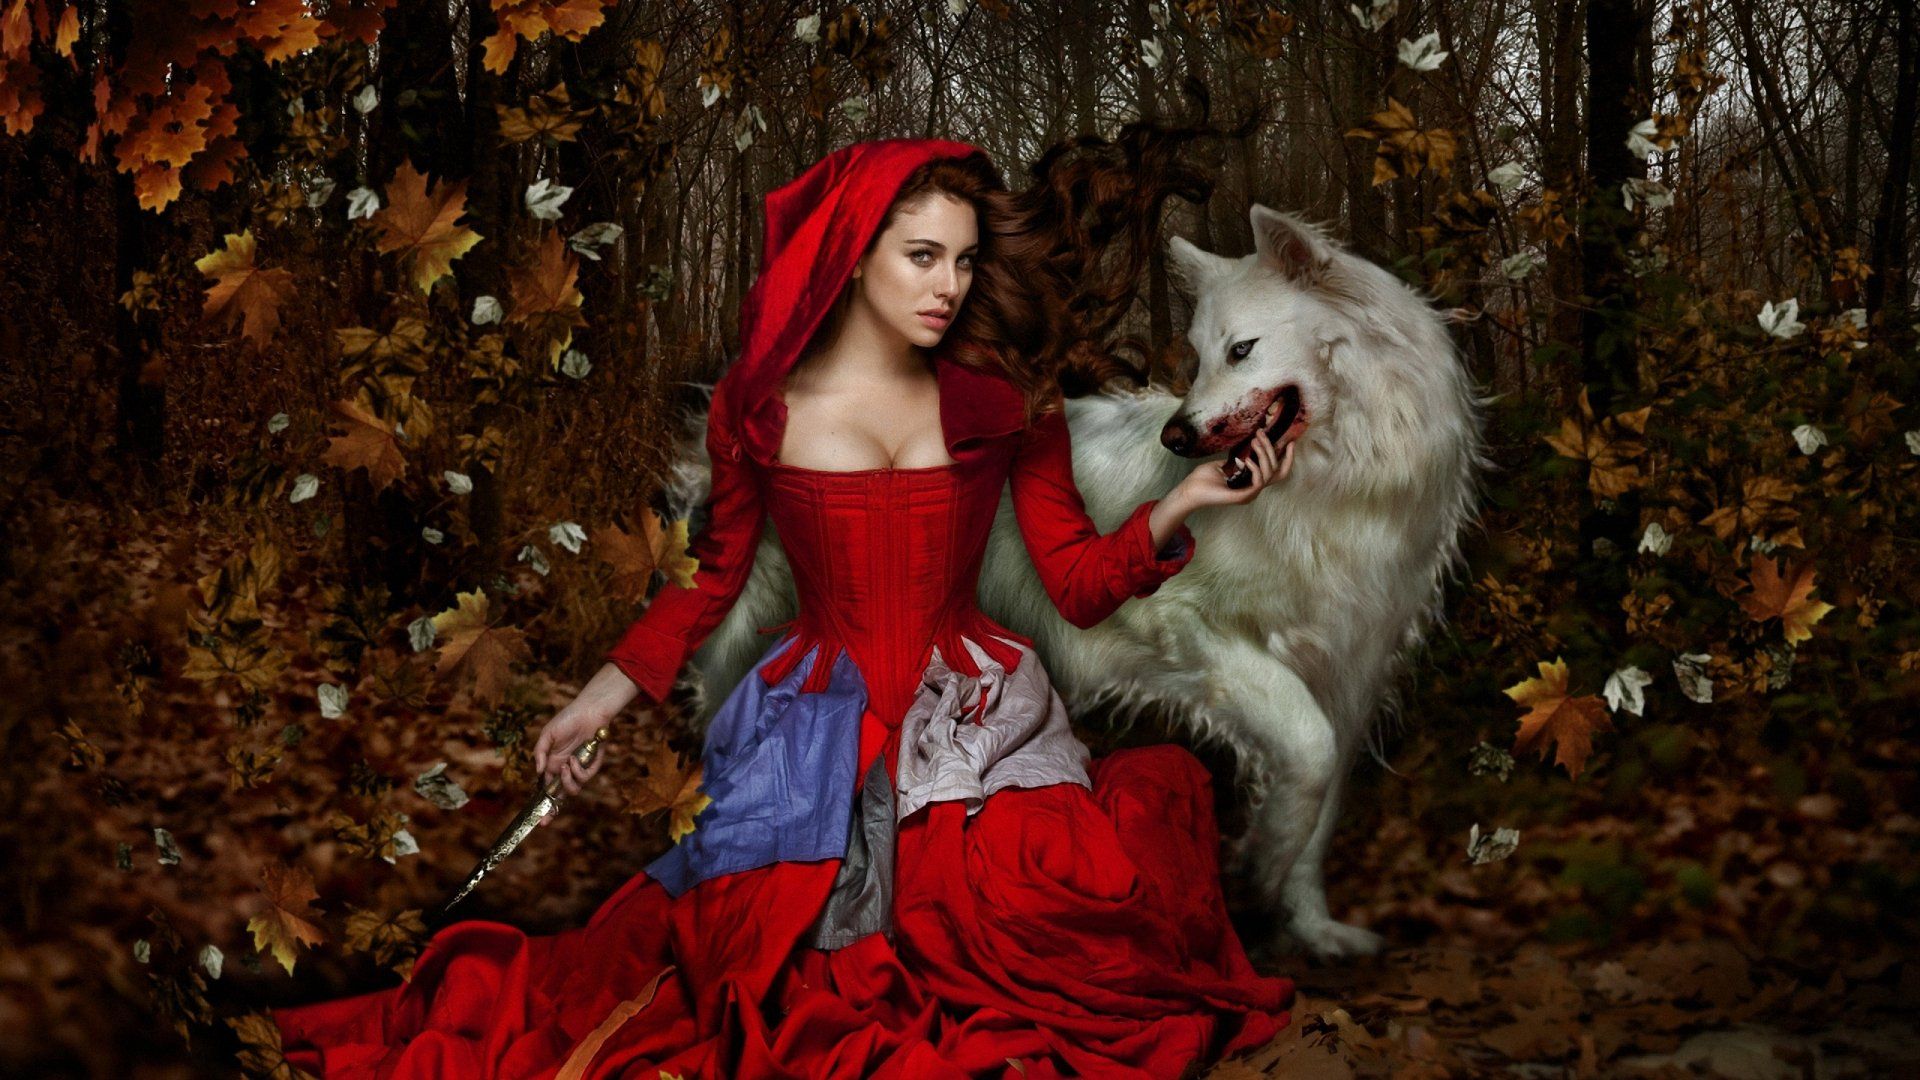 wolf, Girl, Woman, Fantasy, Blood, Animal, Dress, Red, Knife, Forest, Female, Autumn Wallpaper HD / Desktop and Mobile Background